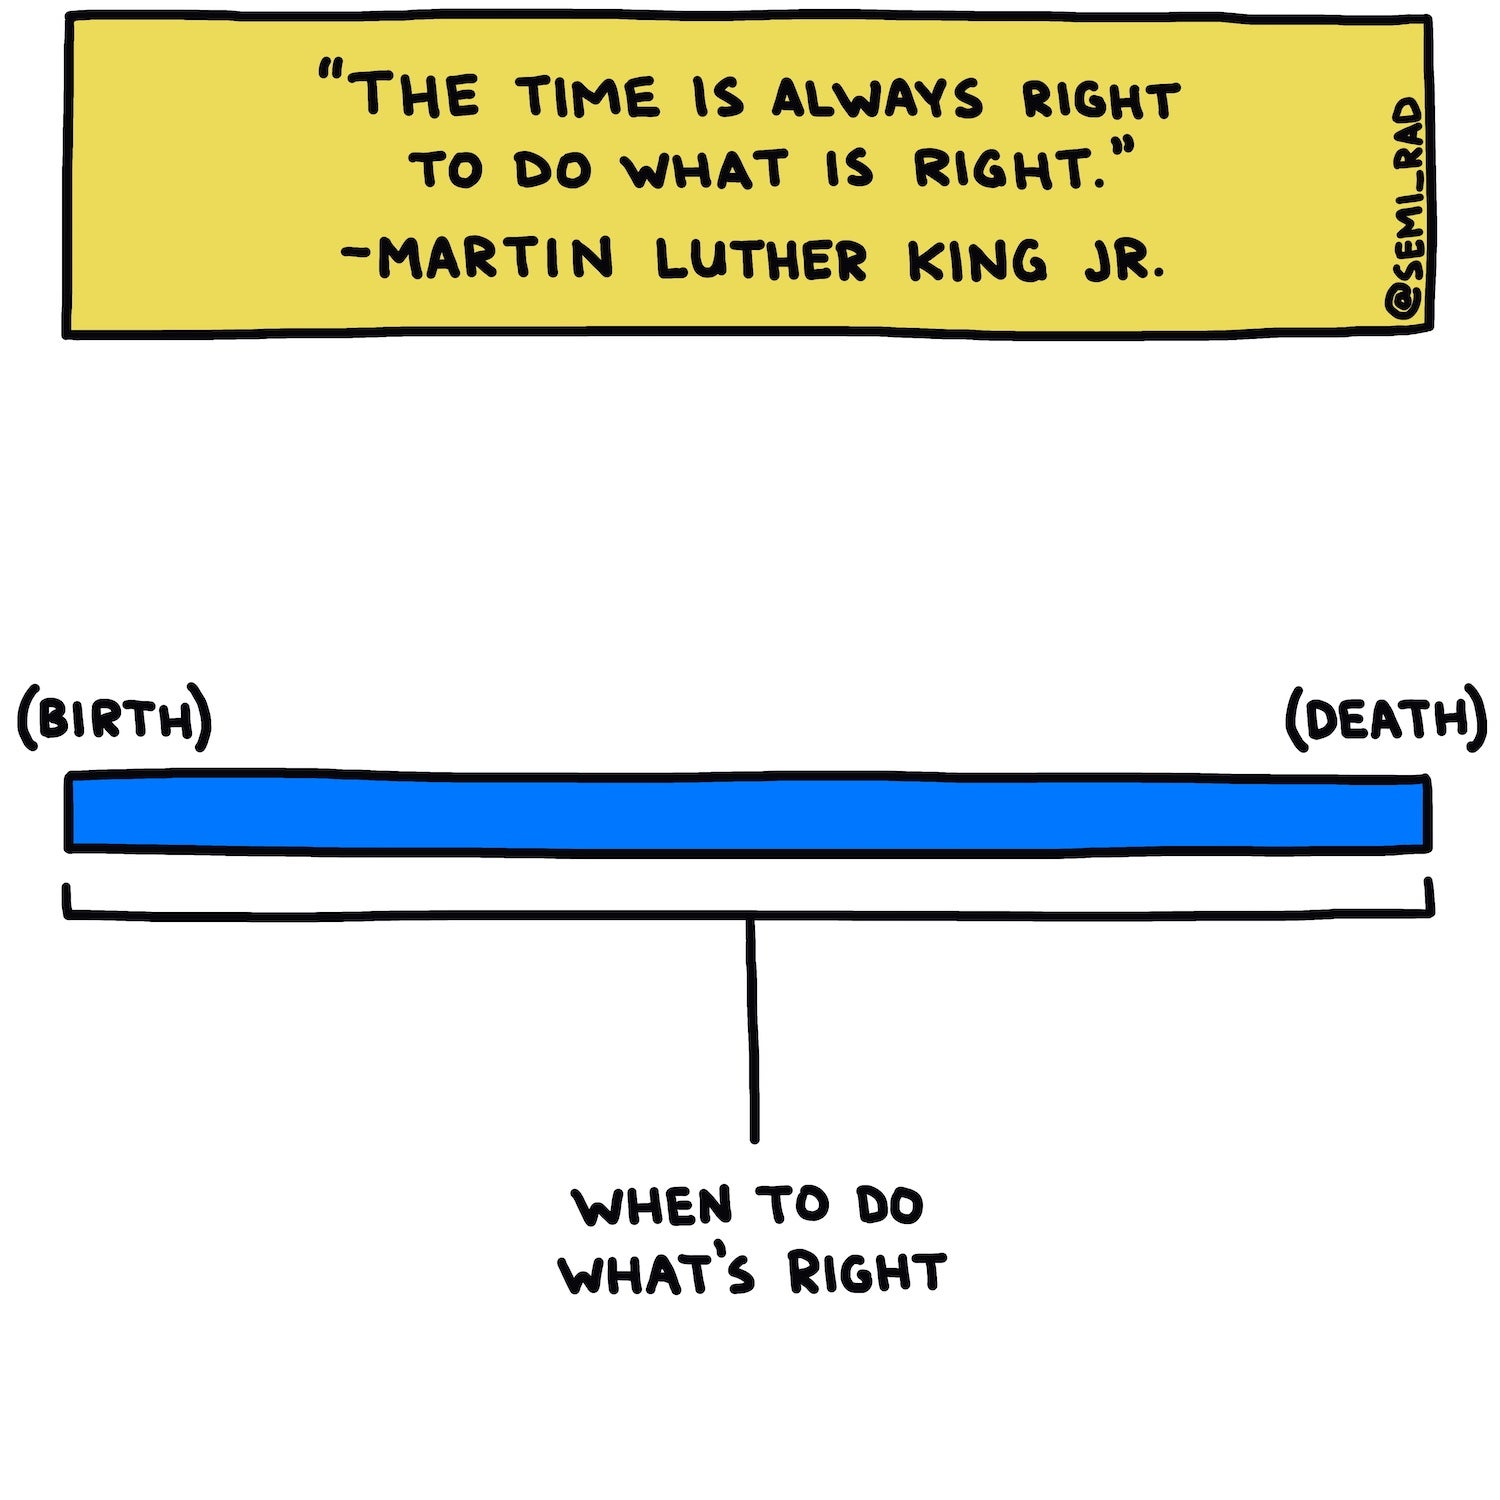 graph saying when to do what's right from birth to death with Martin Luther King Jr. quote